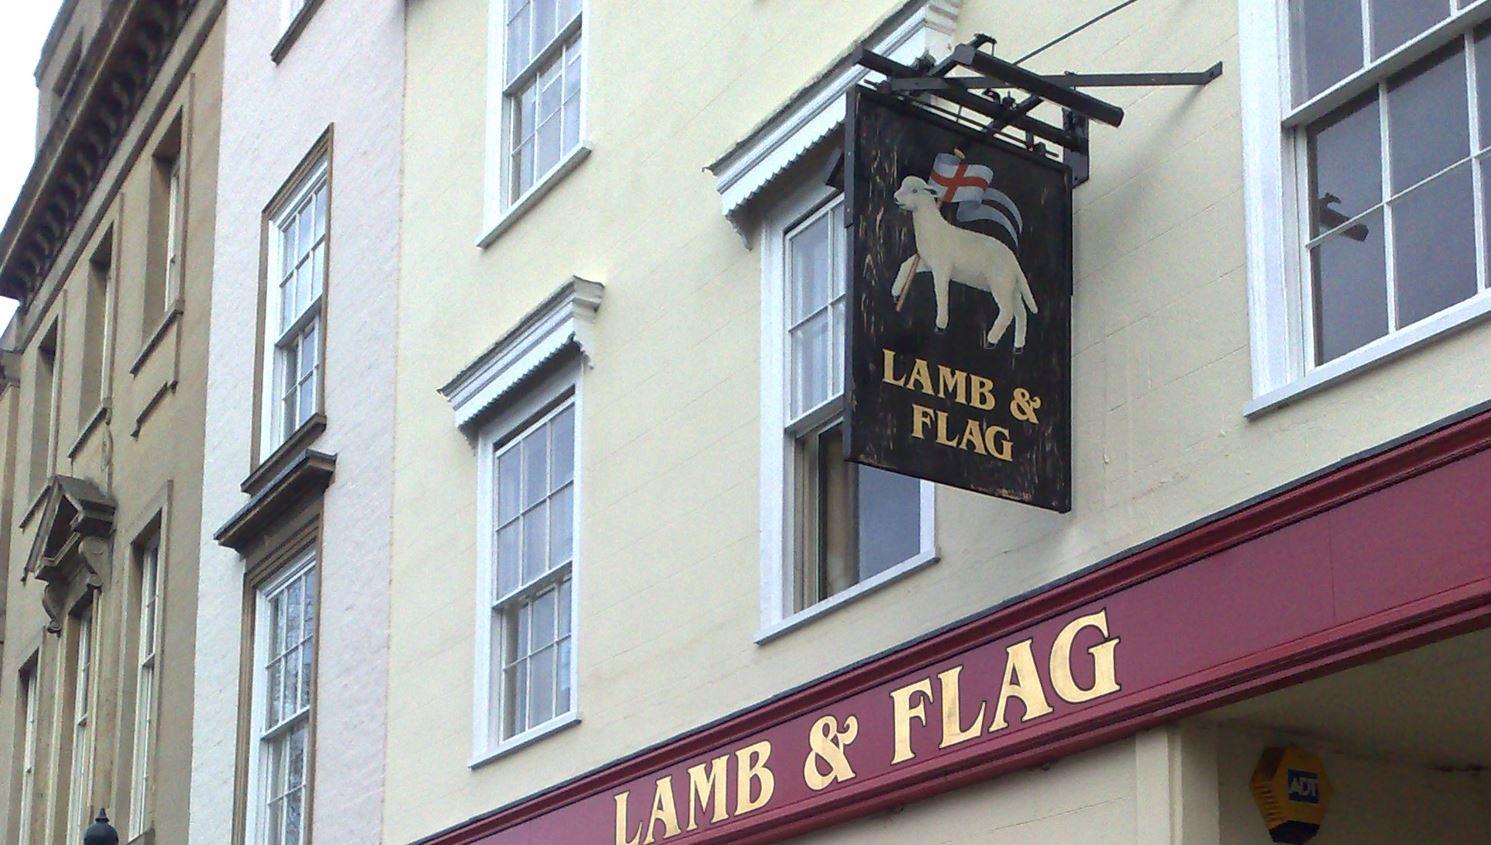 Oxford pub that hosted J.R.R. Tolkien, C.S. Lewis saved from closure